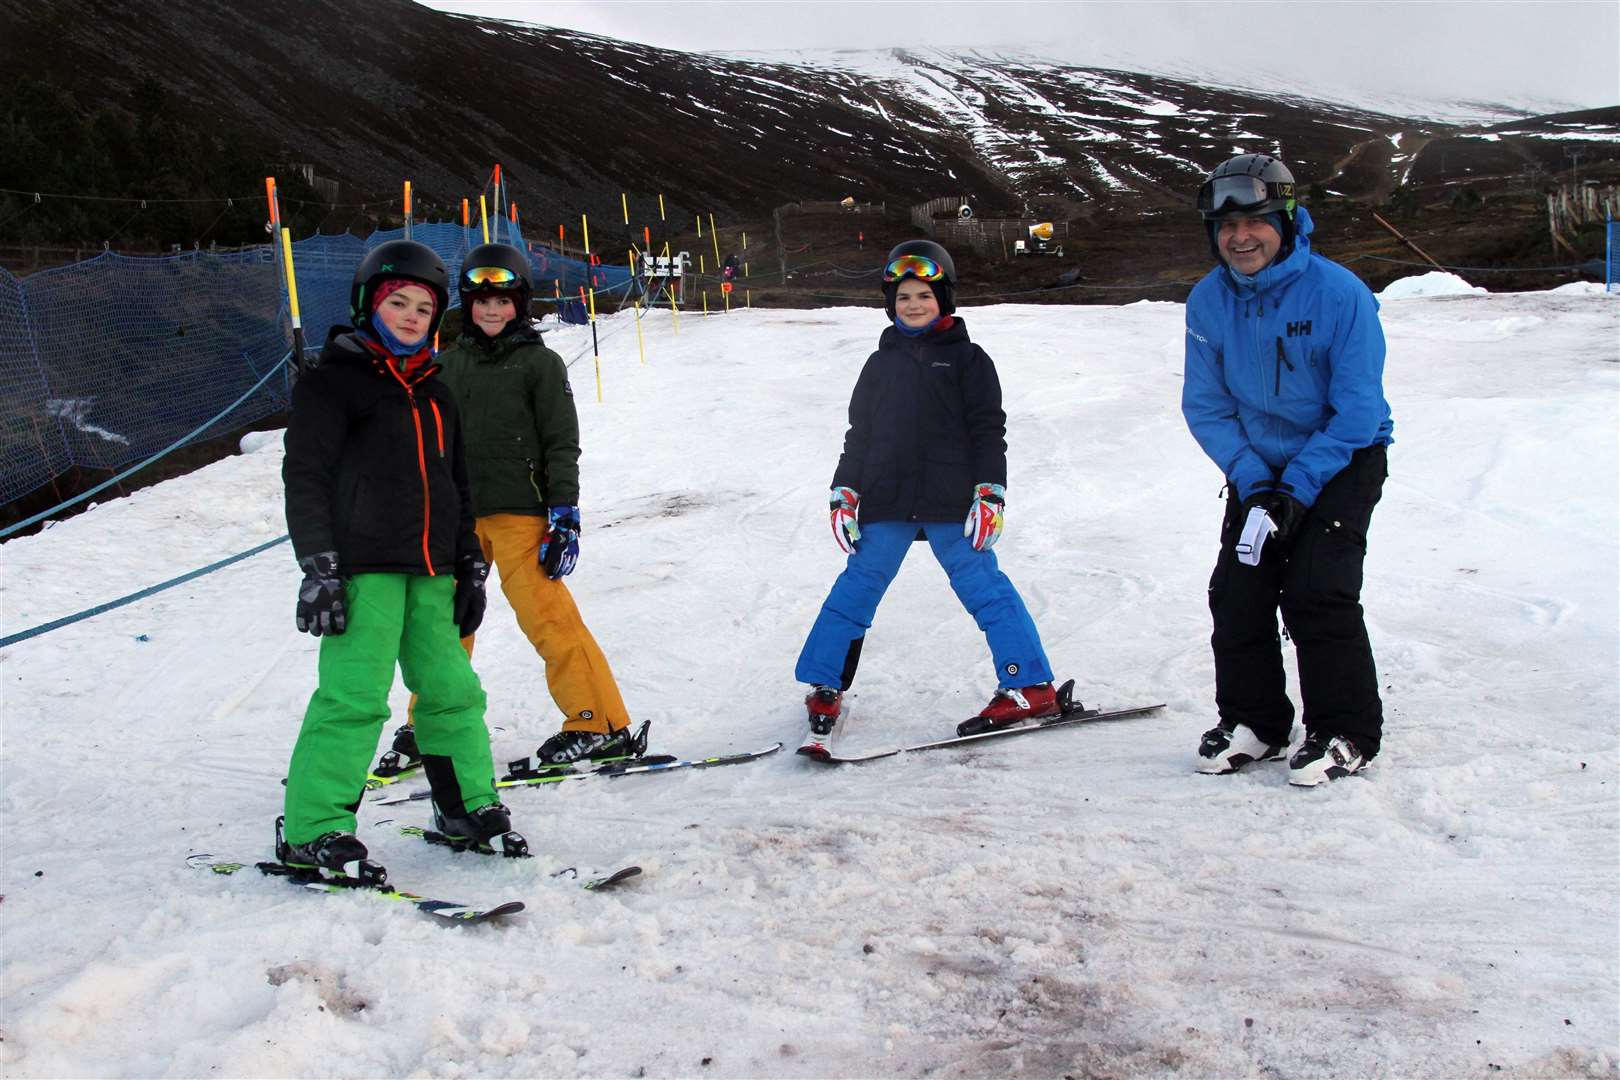 There was just one weekend of the new snowsports season - the Saturday and Sunday before Christmas - before Cairngorm Mountain's temporary closure.